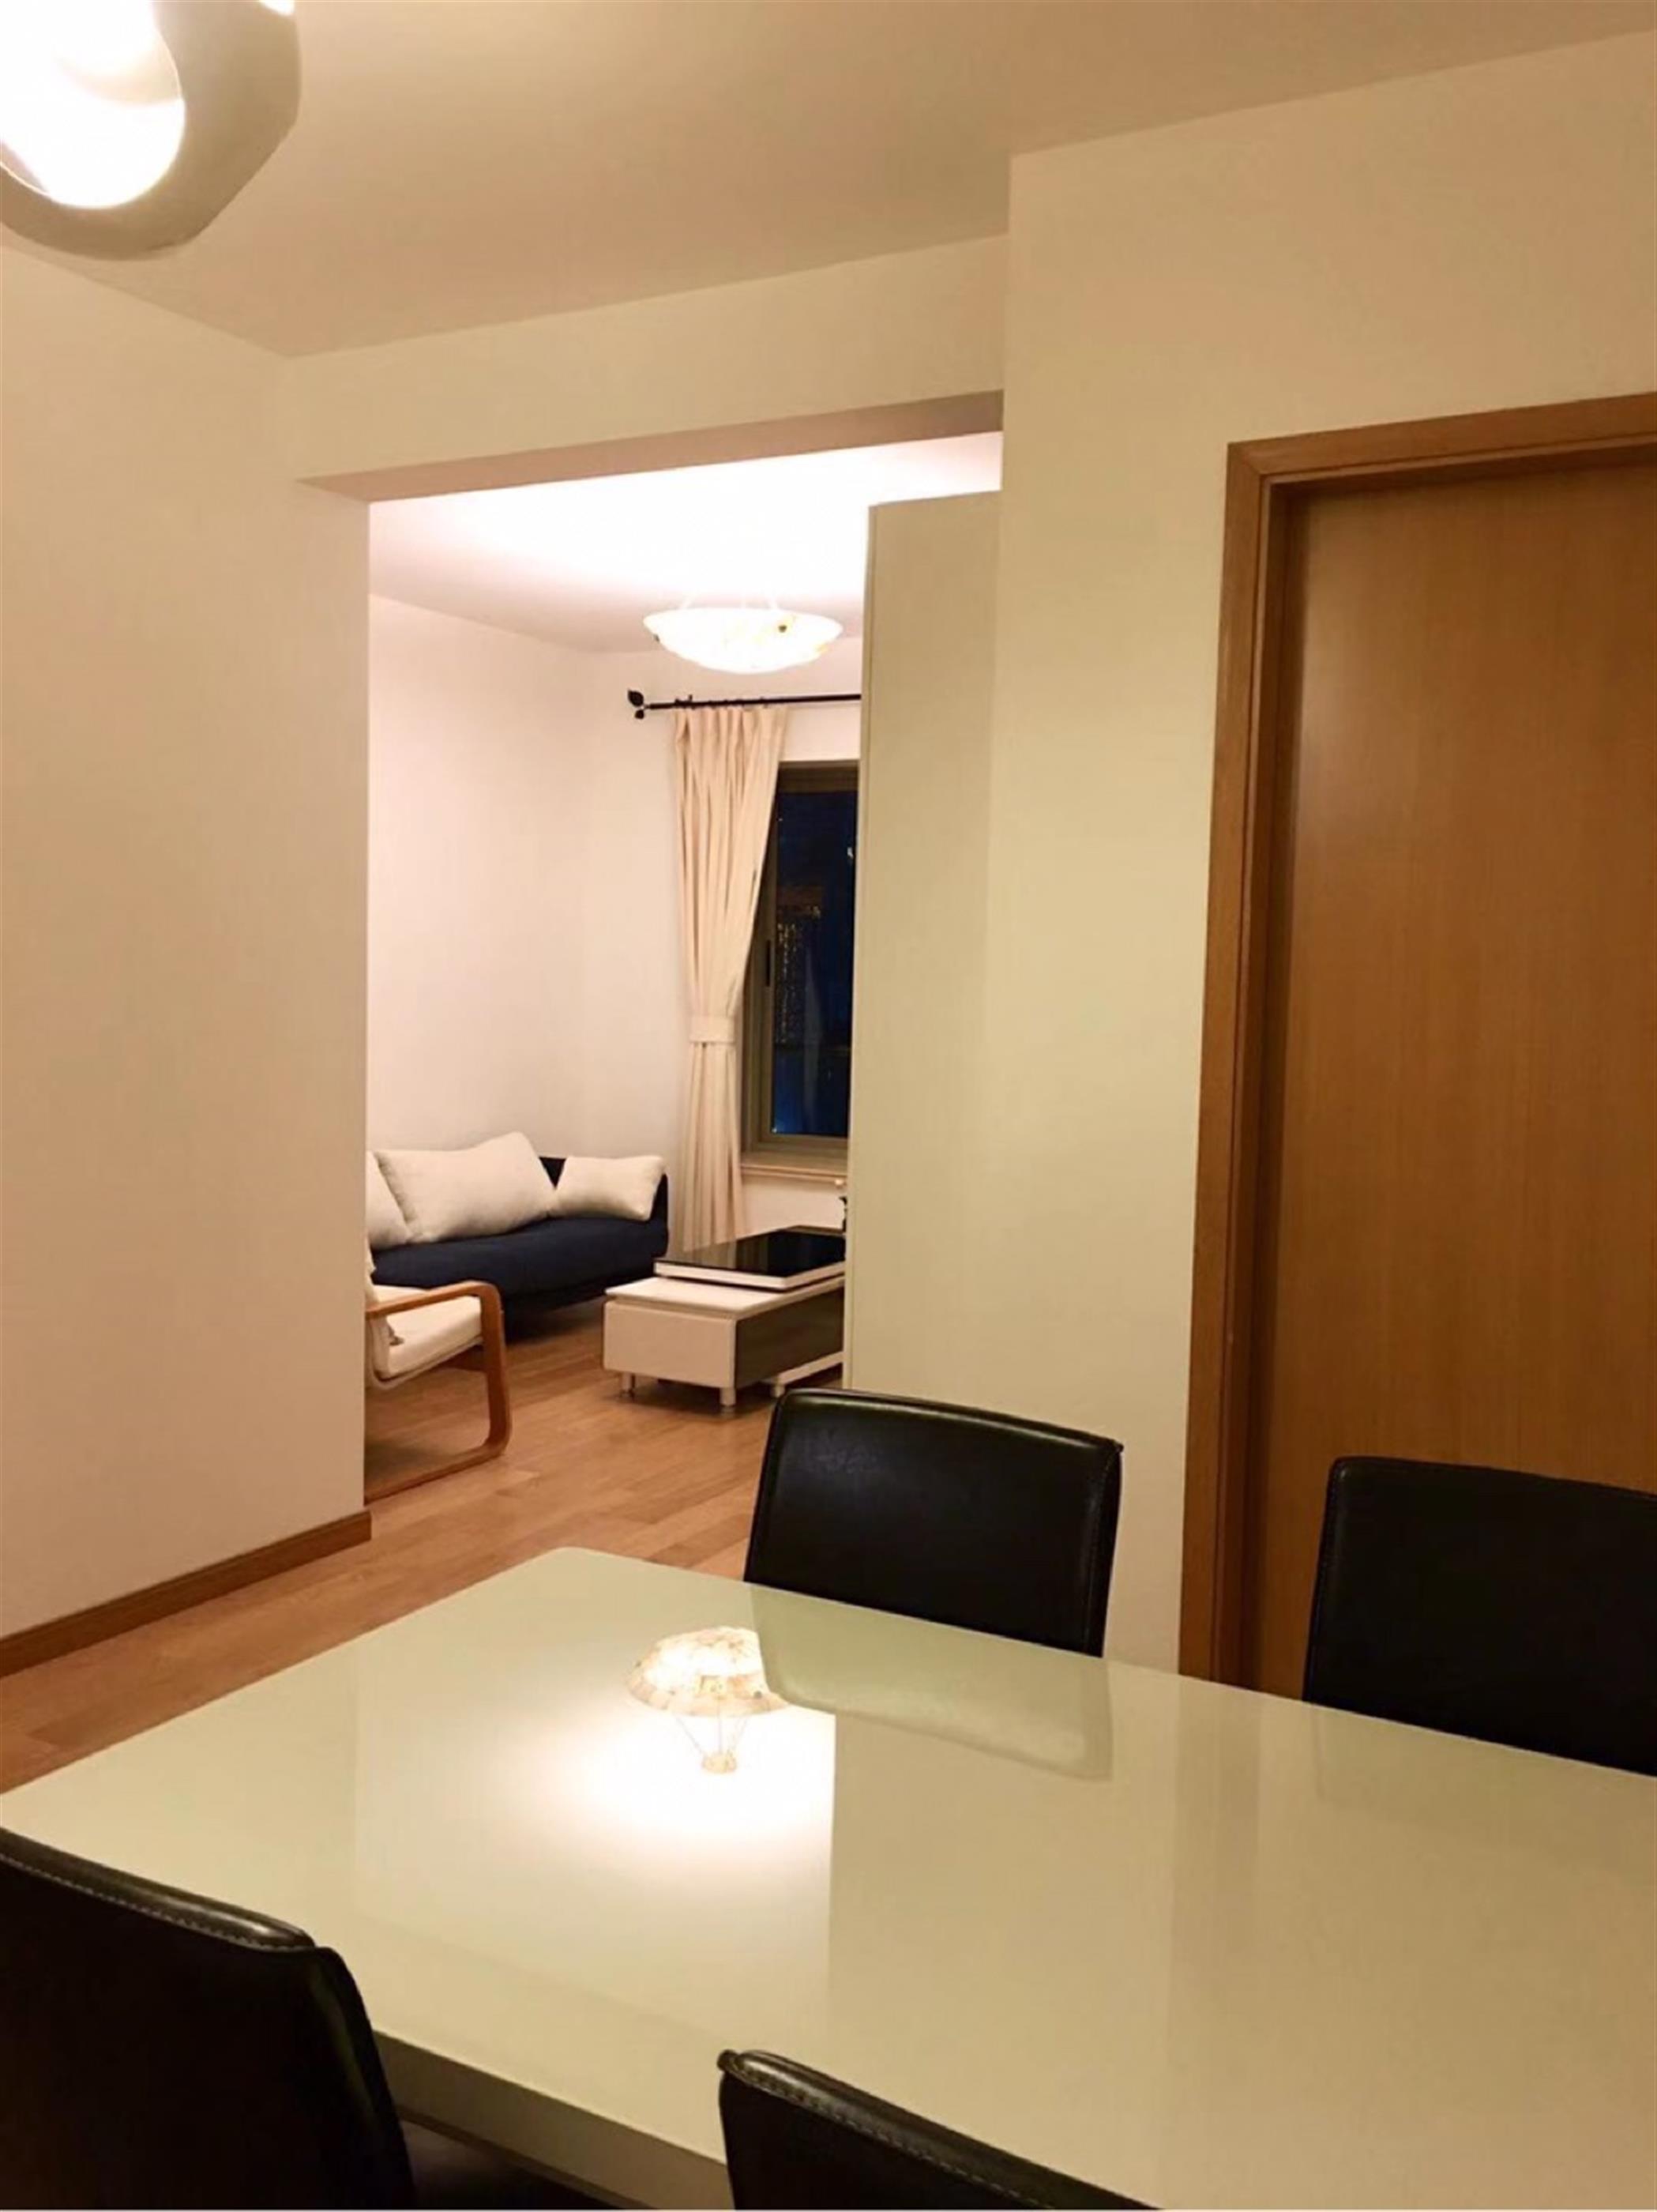 dining area Large Comfortable 2BR One Park Ave Apt for Rent in Shanghai Jing’an Near LN 2/7